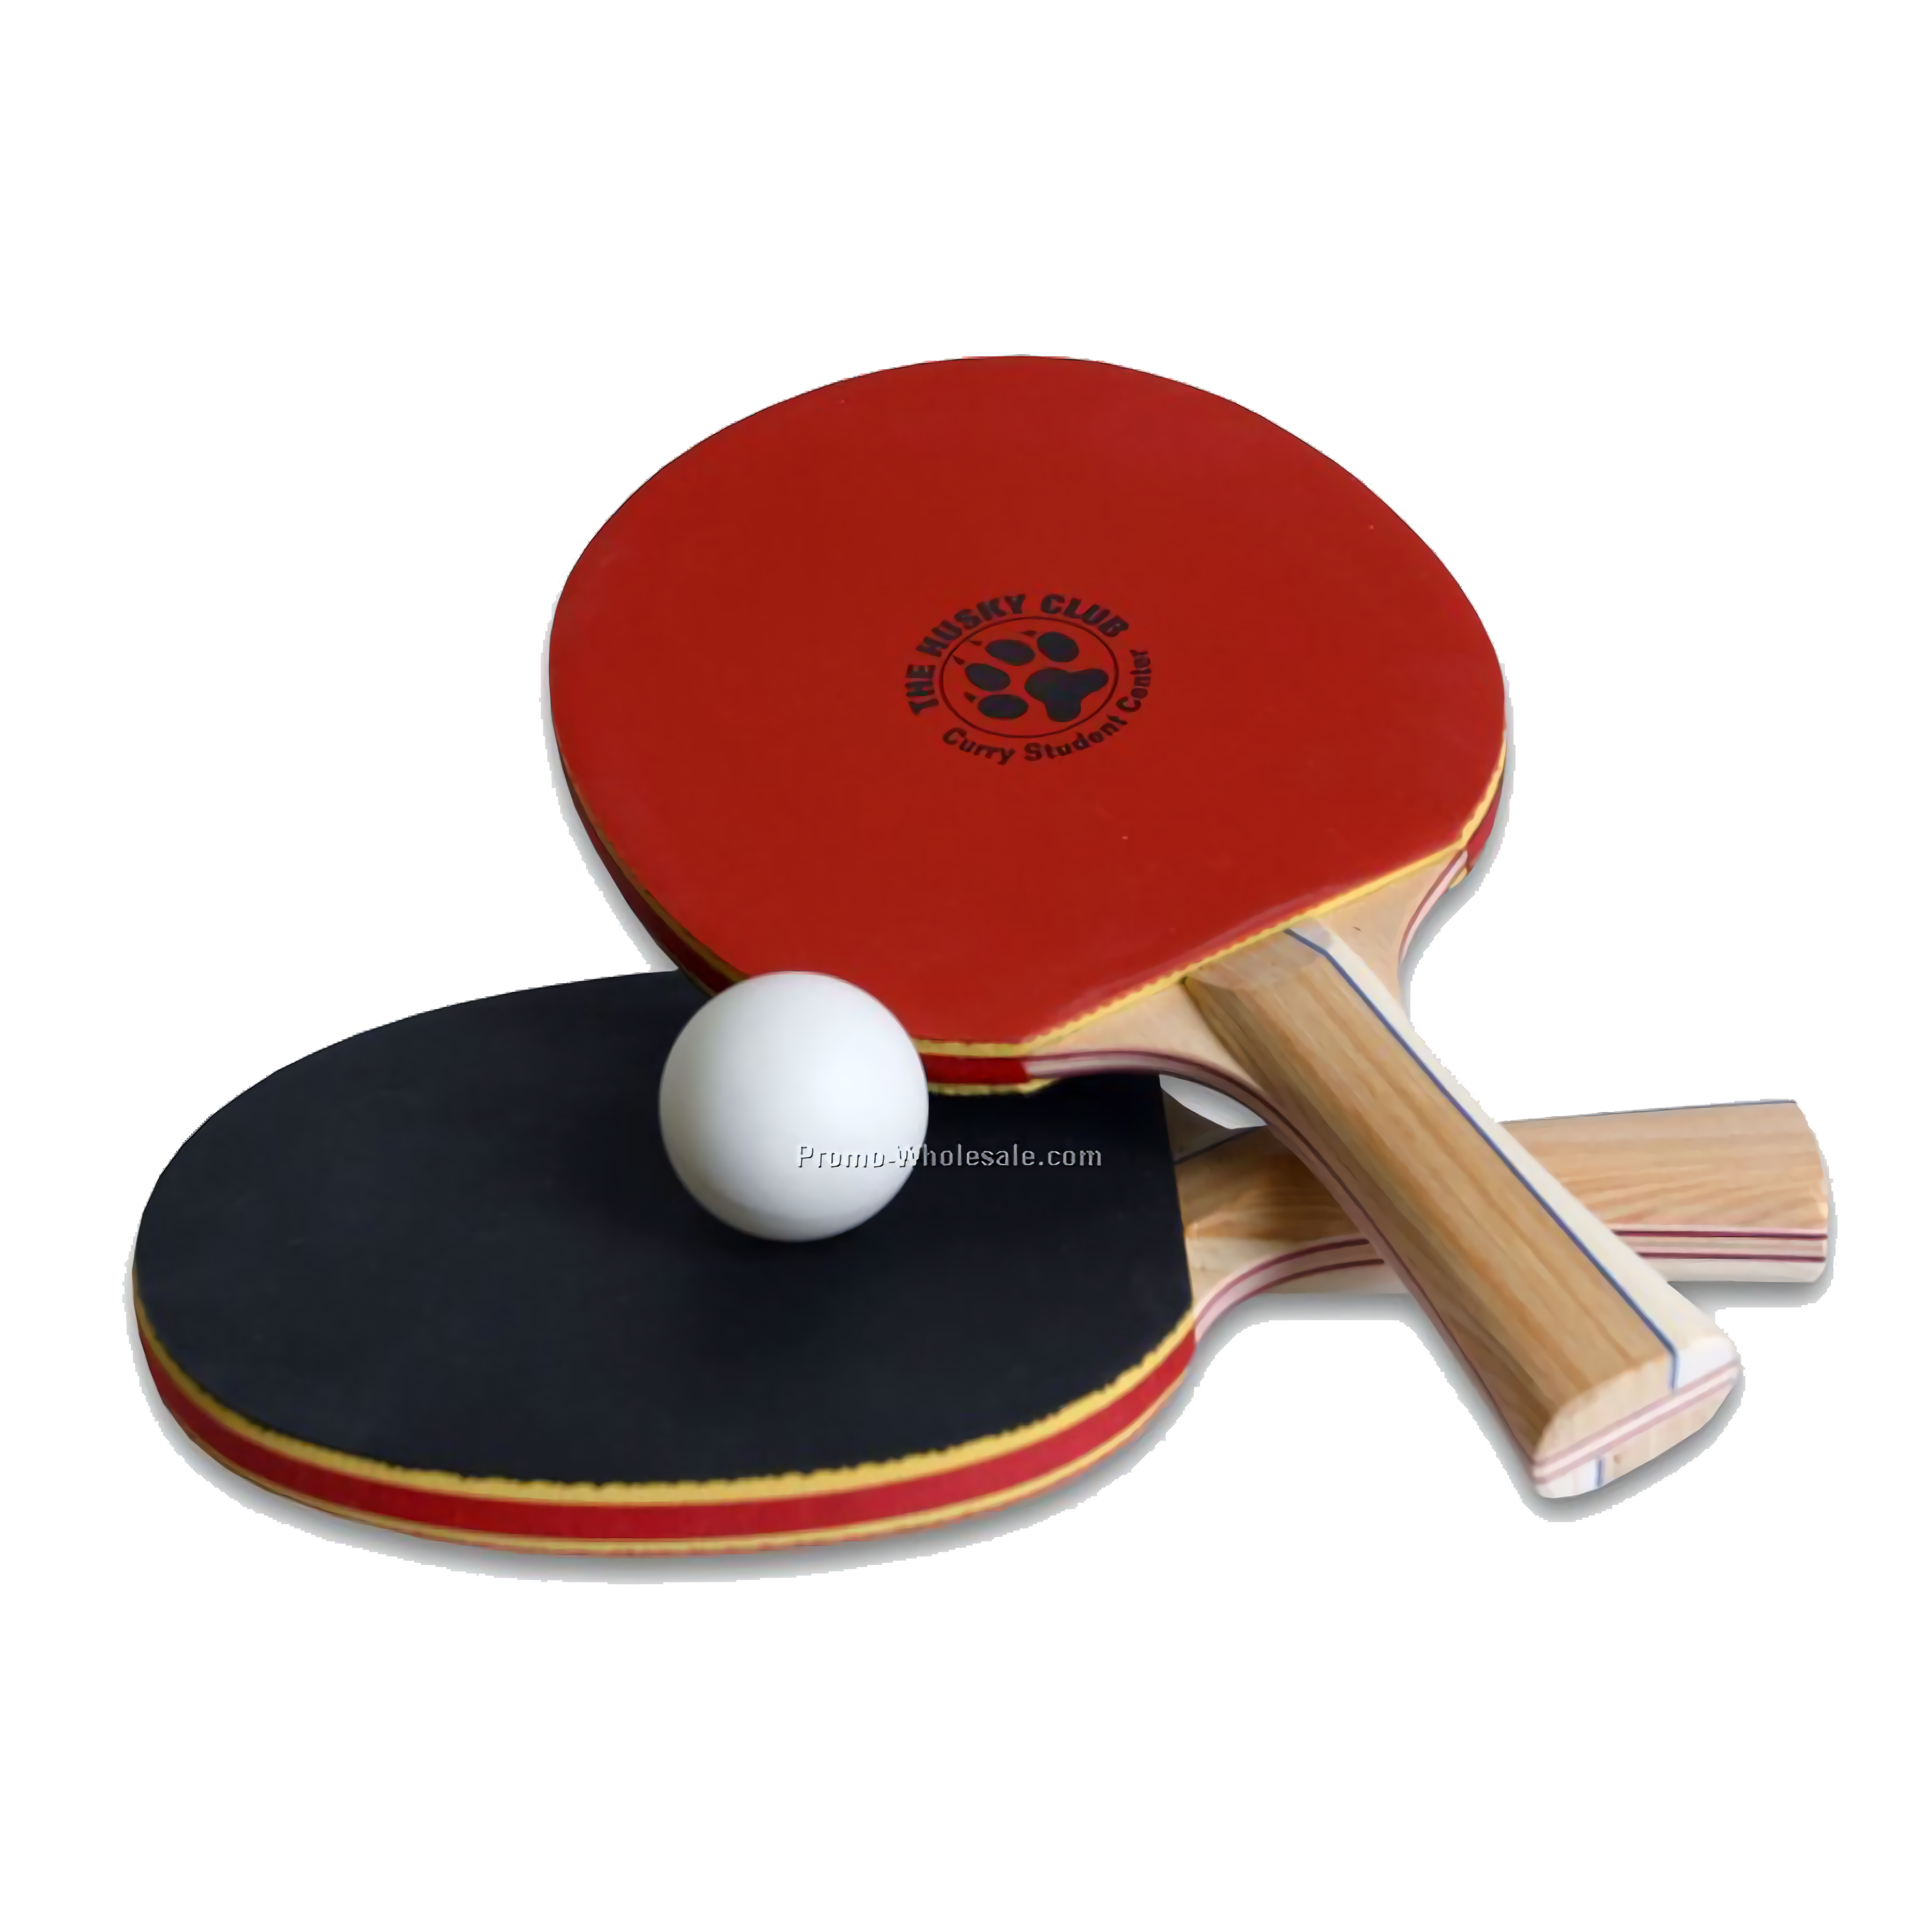 Ping Pong Hry